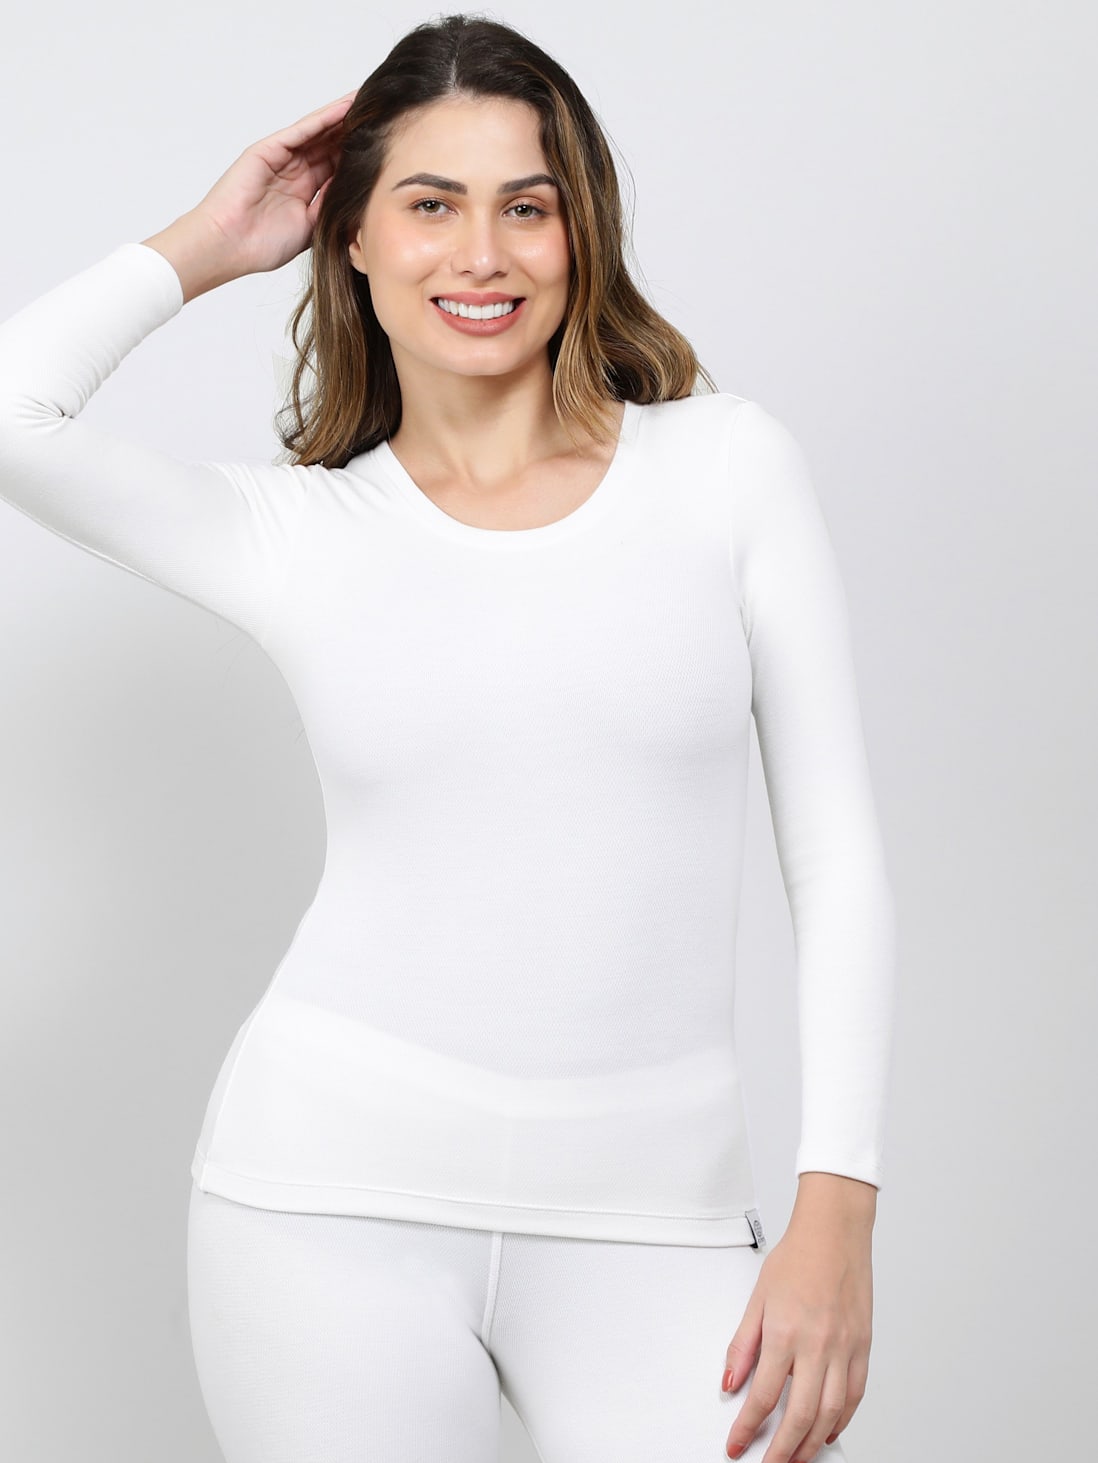 Buy Women's Soft Touch Microfiber Elastane Stretch Fleece Fabric Full  Sleeve Thermal Top with Stay Warm Technology - Light Bright White 2540